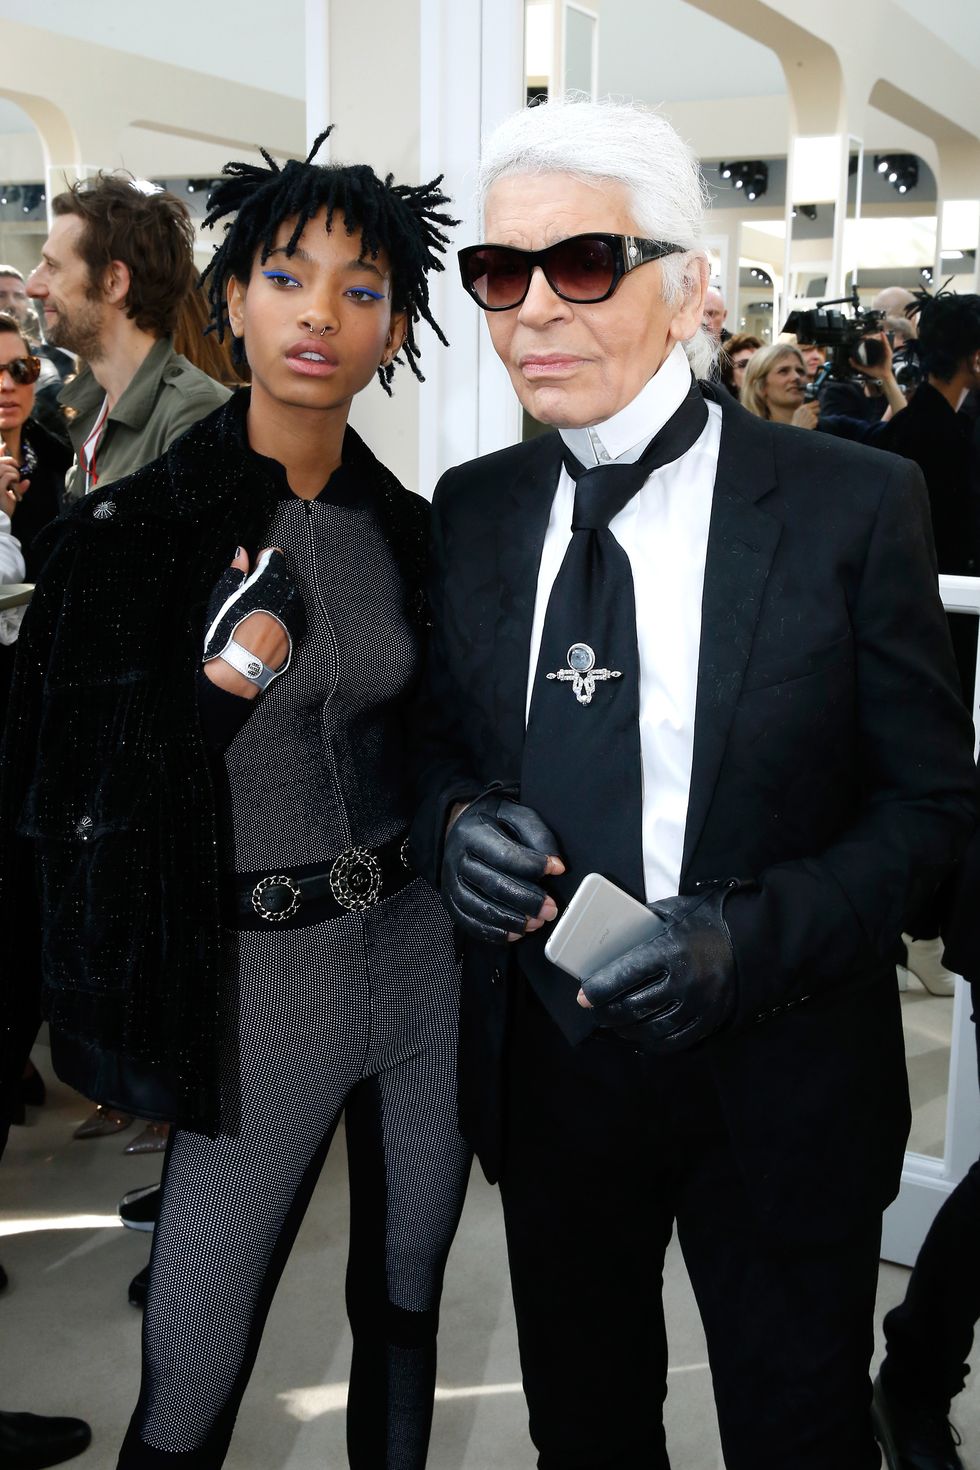 Willow Smith, 15, becomes next new face of Chanel